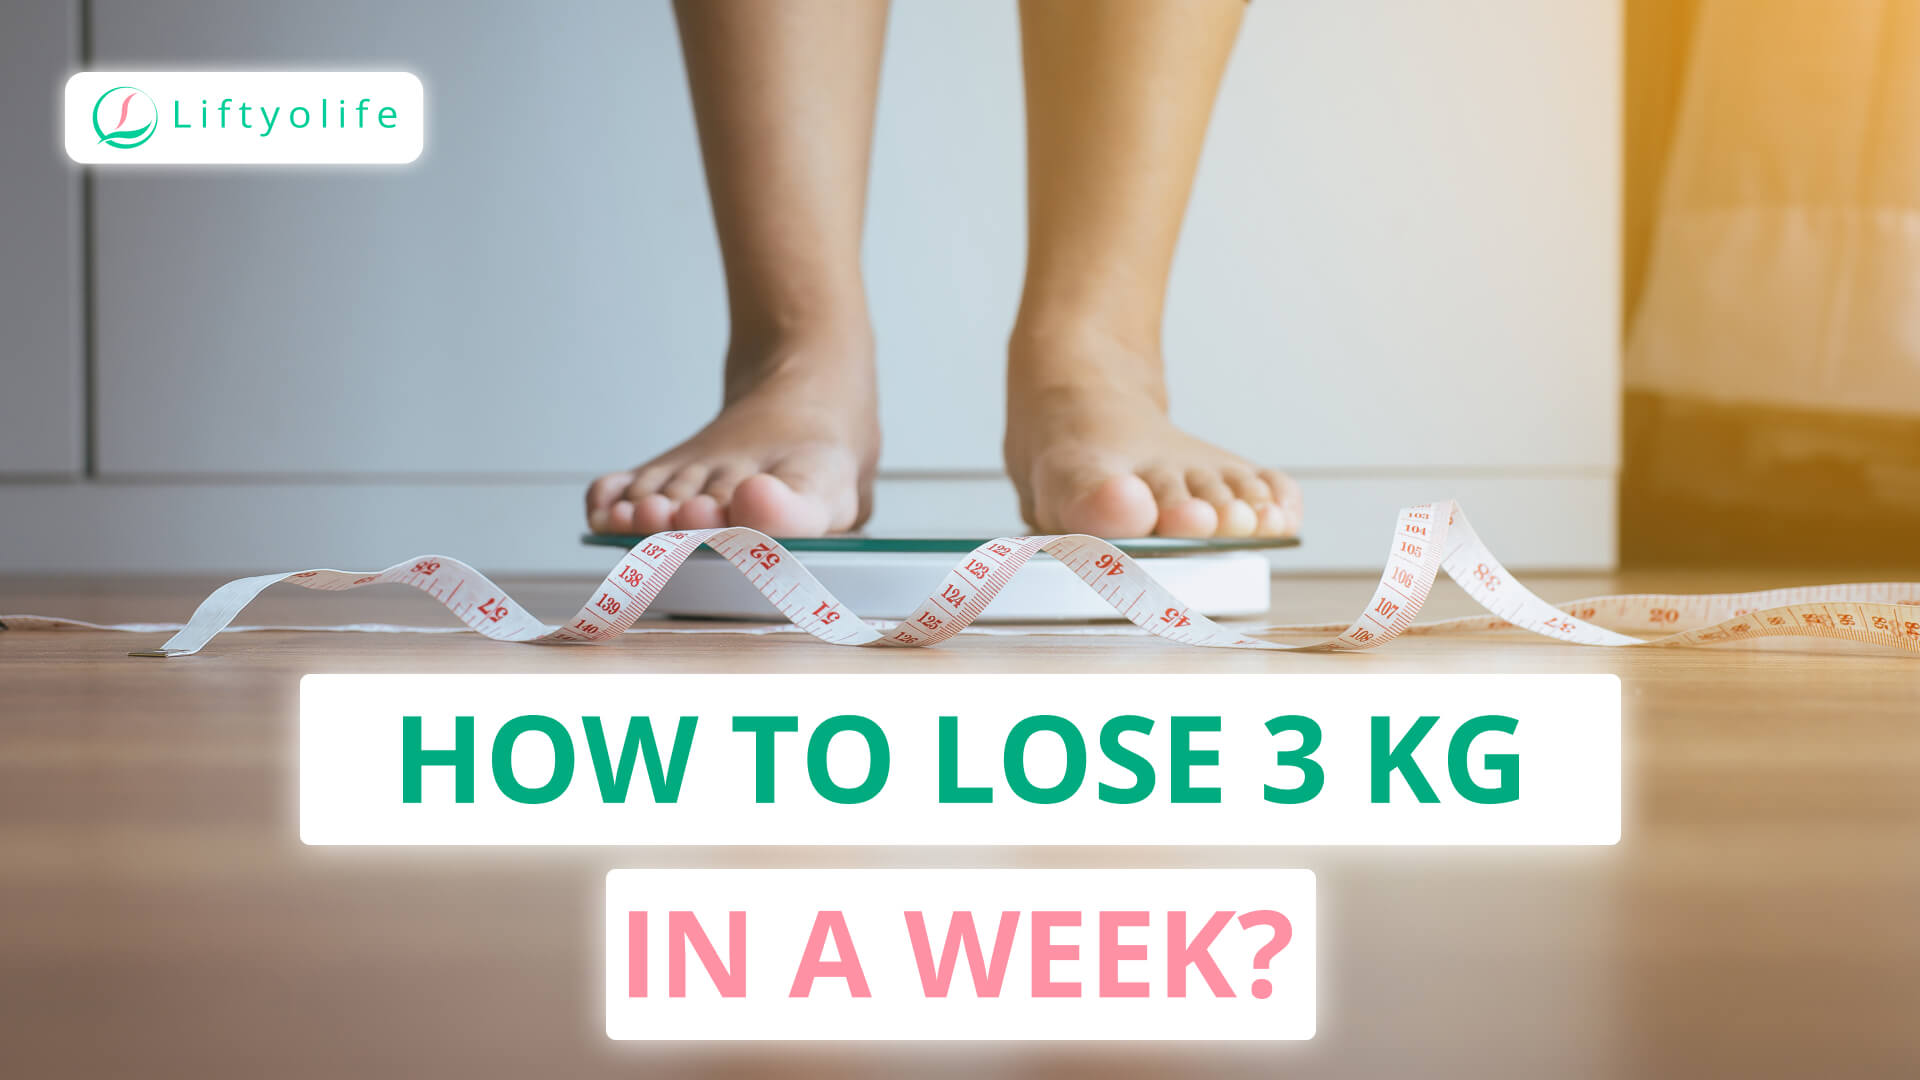 How To Lose 3 Kg In A Week?